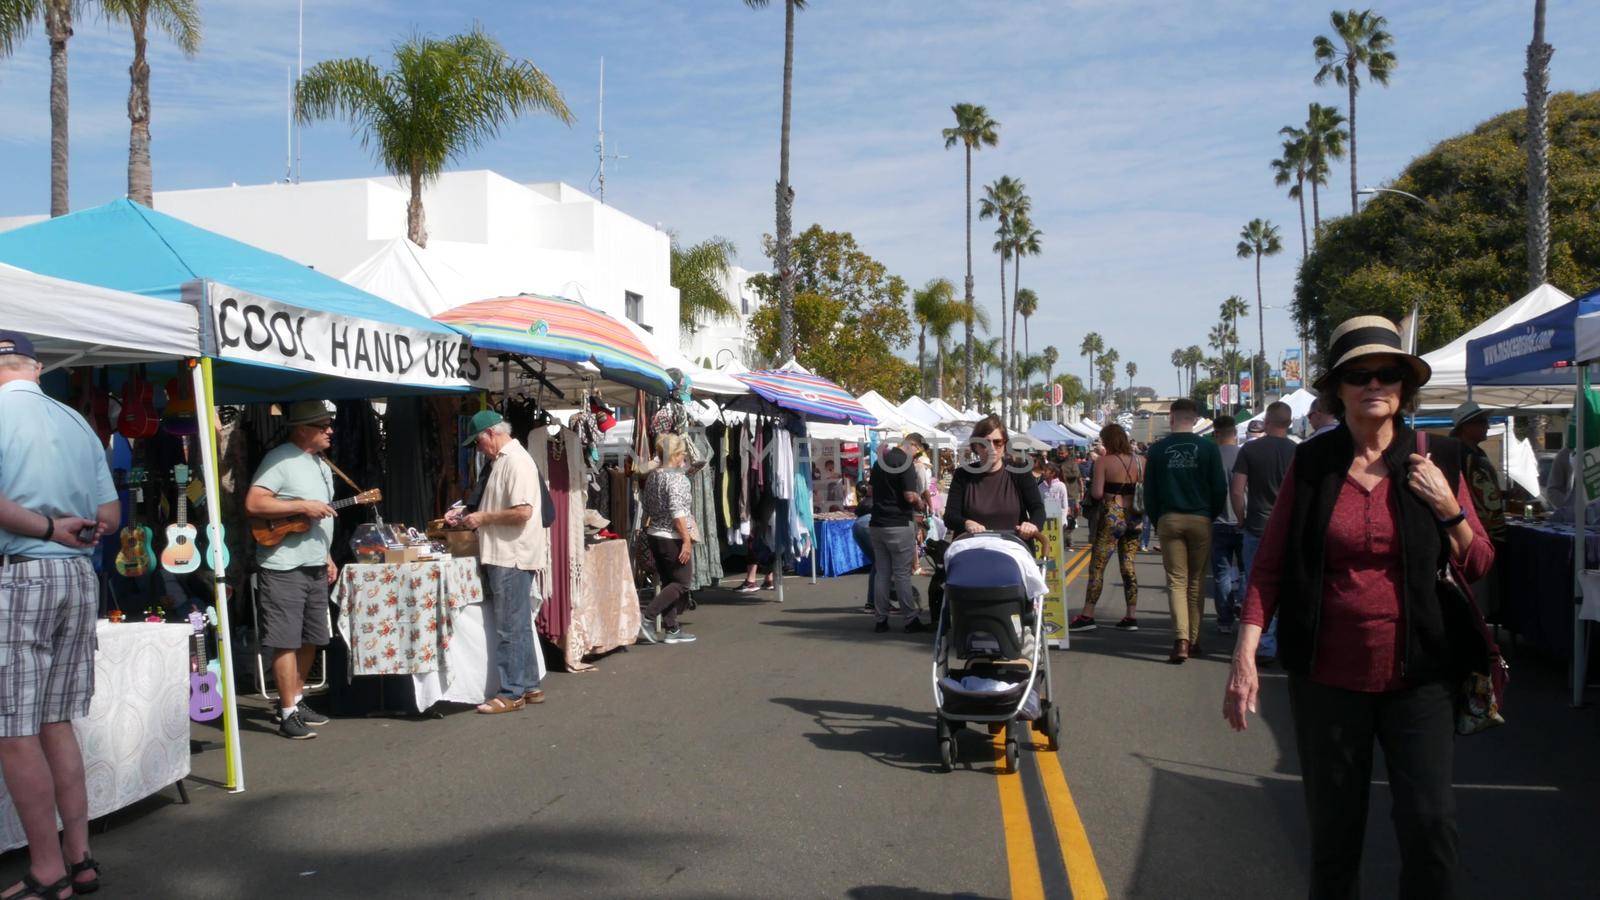 People walking on outdoor street farmers market. Vendors sell locally produced goods, California USA by DogoraSun